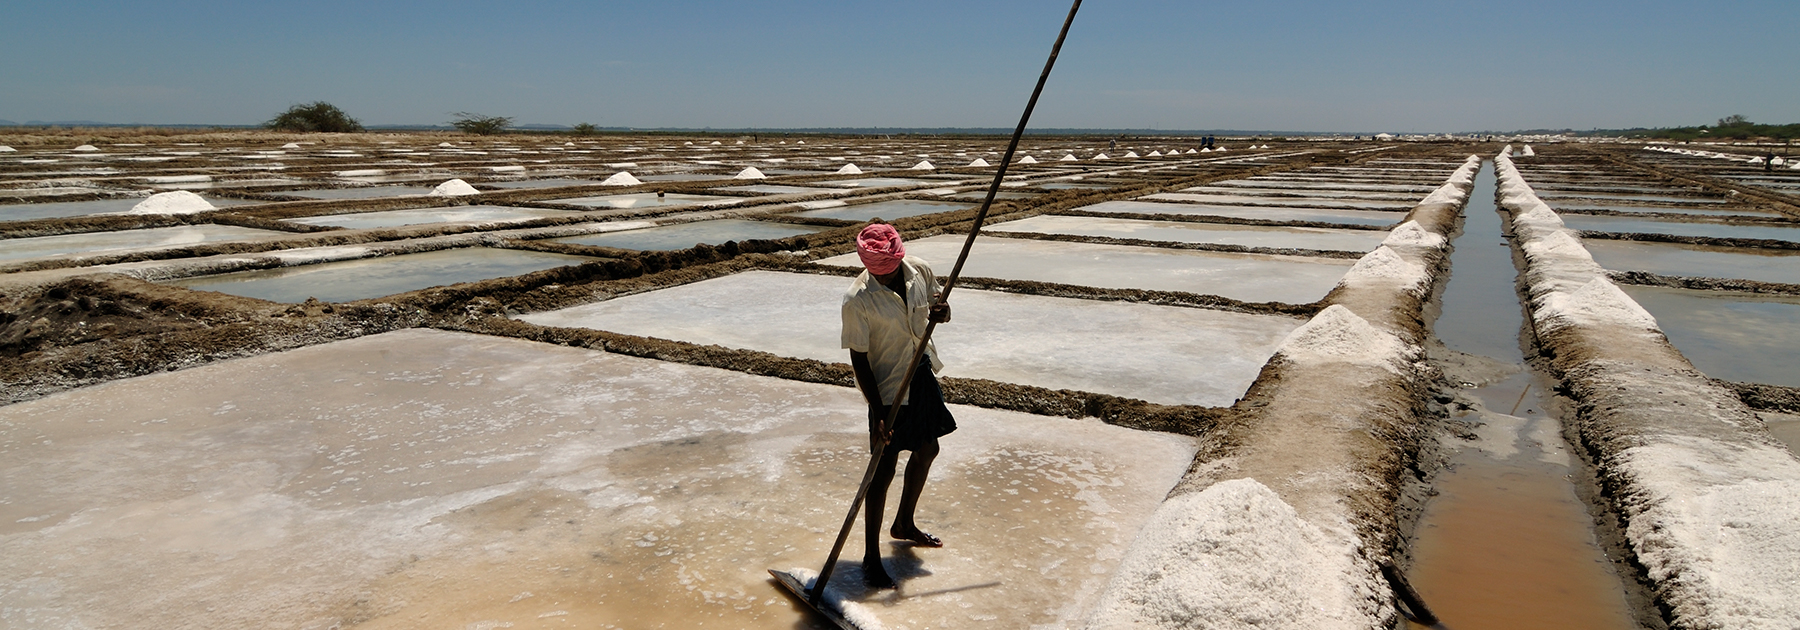 Salt pans in Marakkanam where sea water is pumped into large pans and dried. (Sandip Dey, licensed under CC BY-SA 3.0)